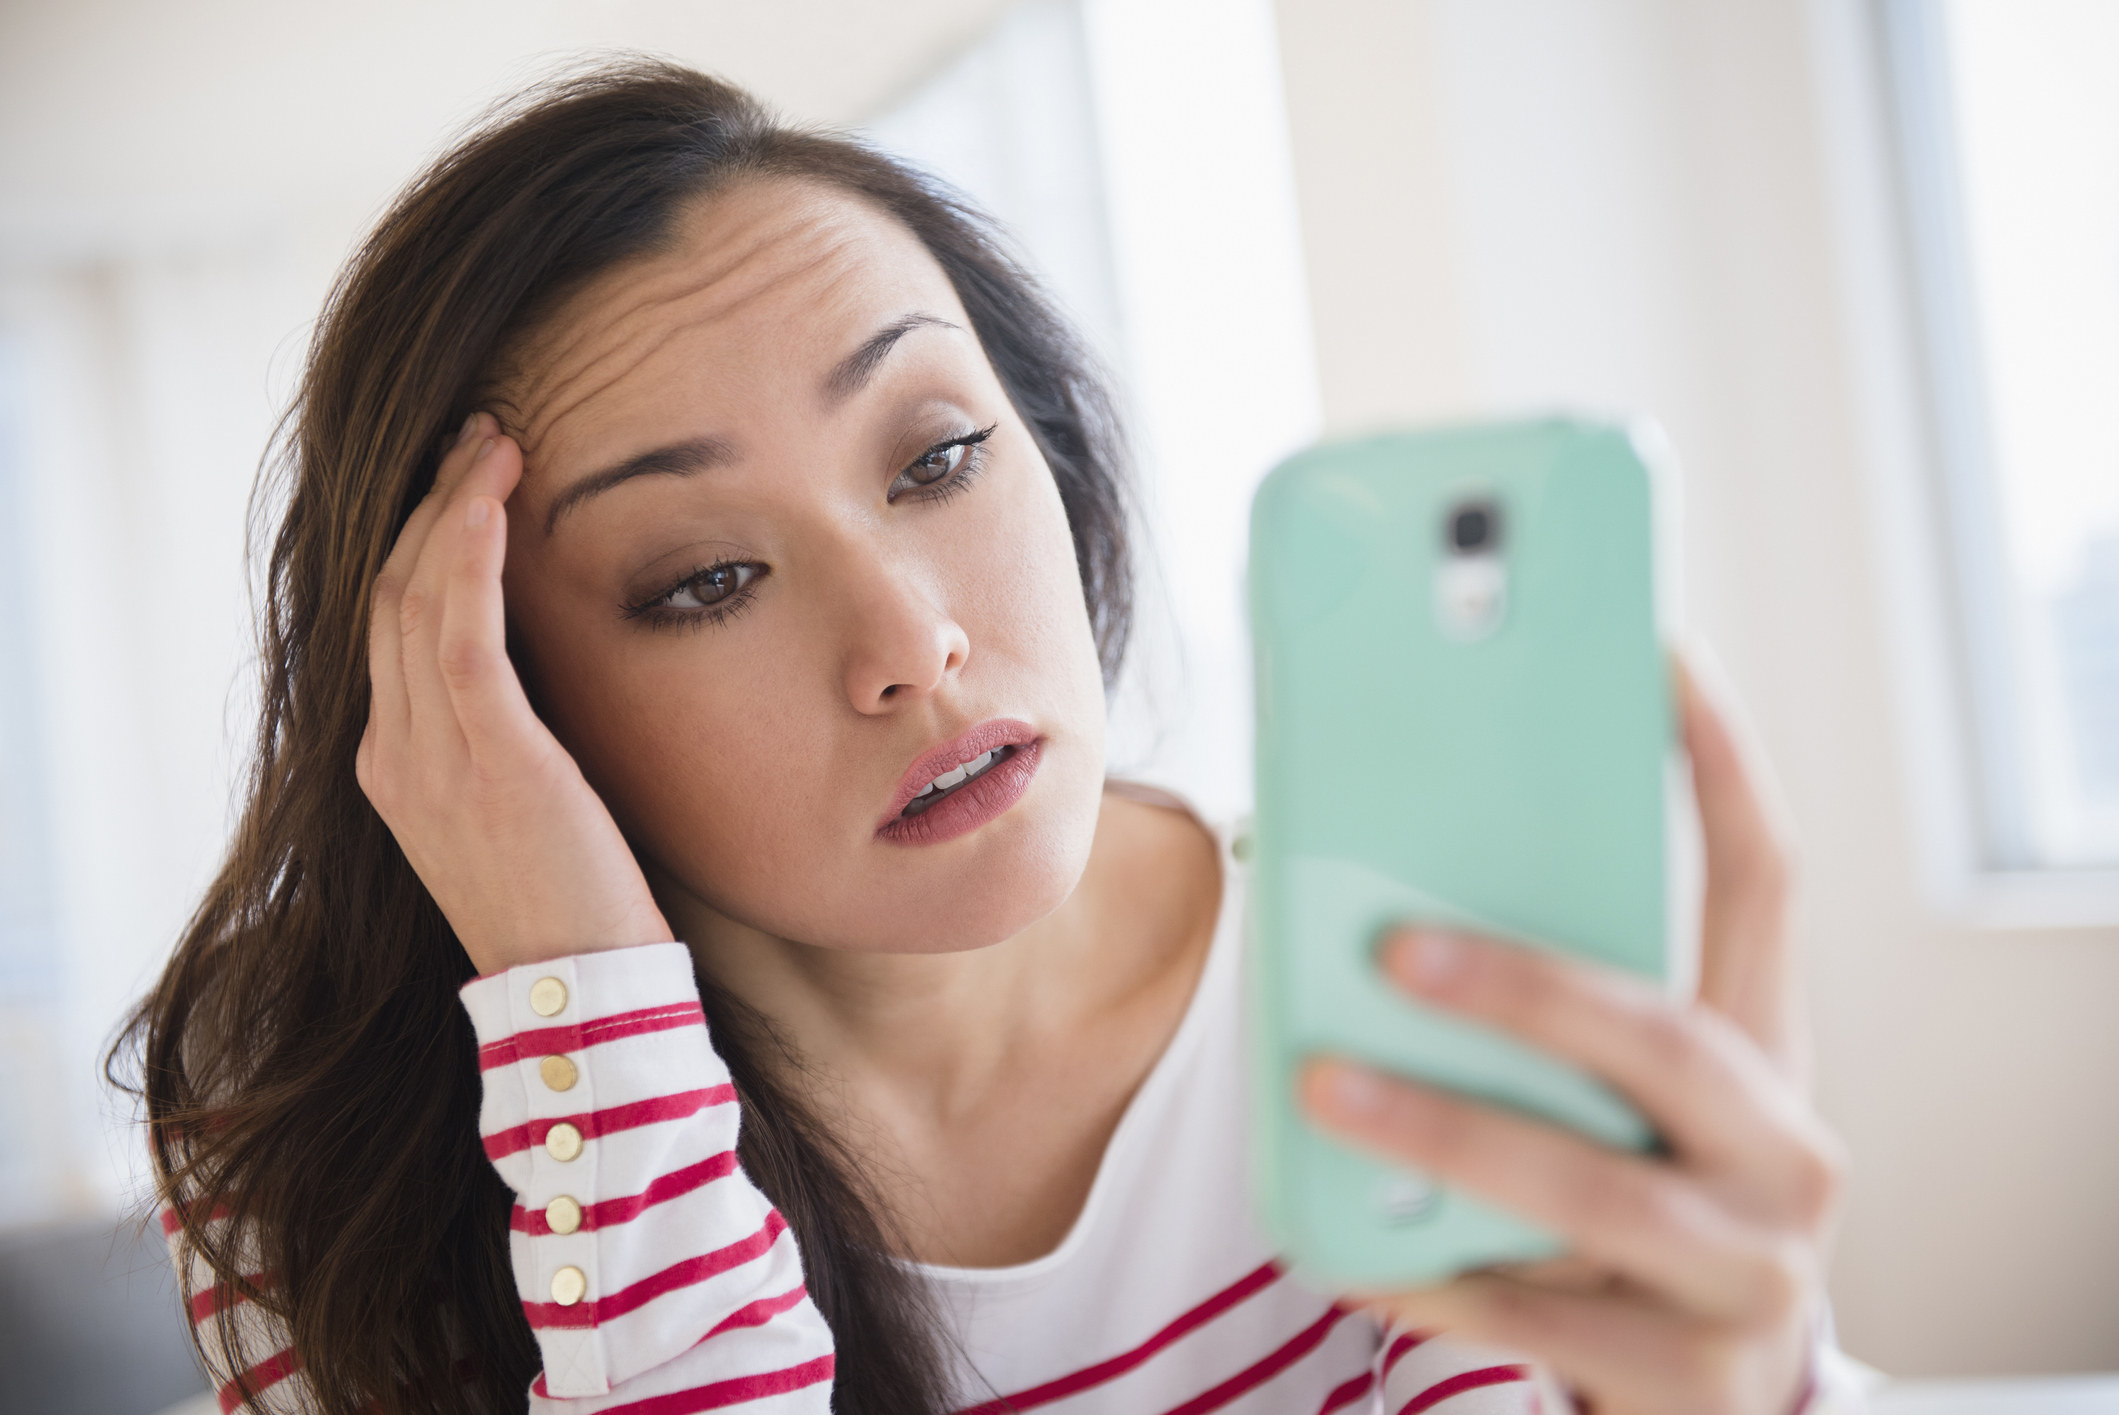 Woman looking at her phone and looking tired